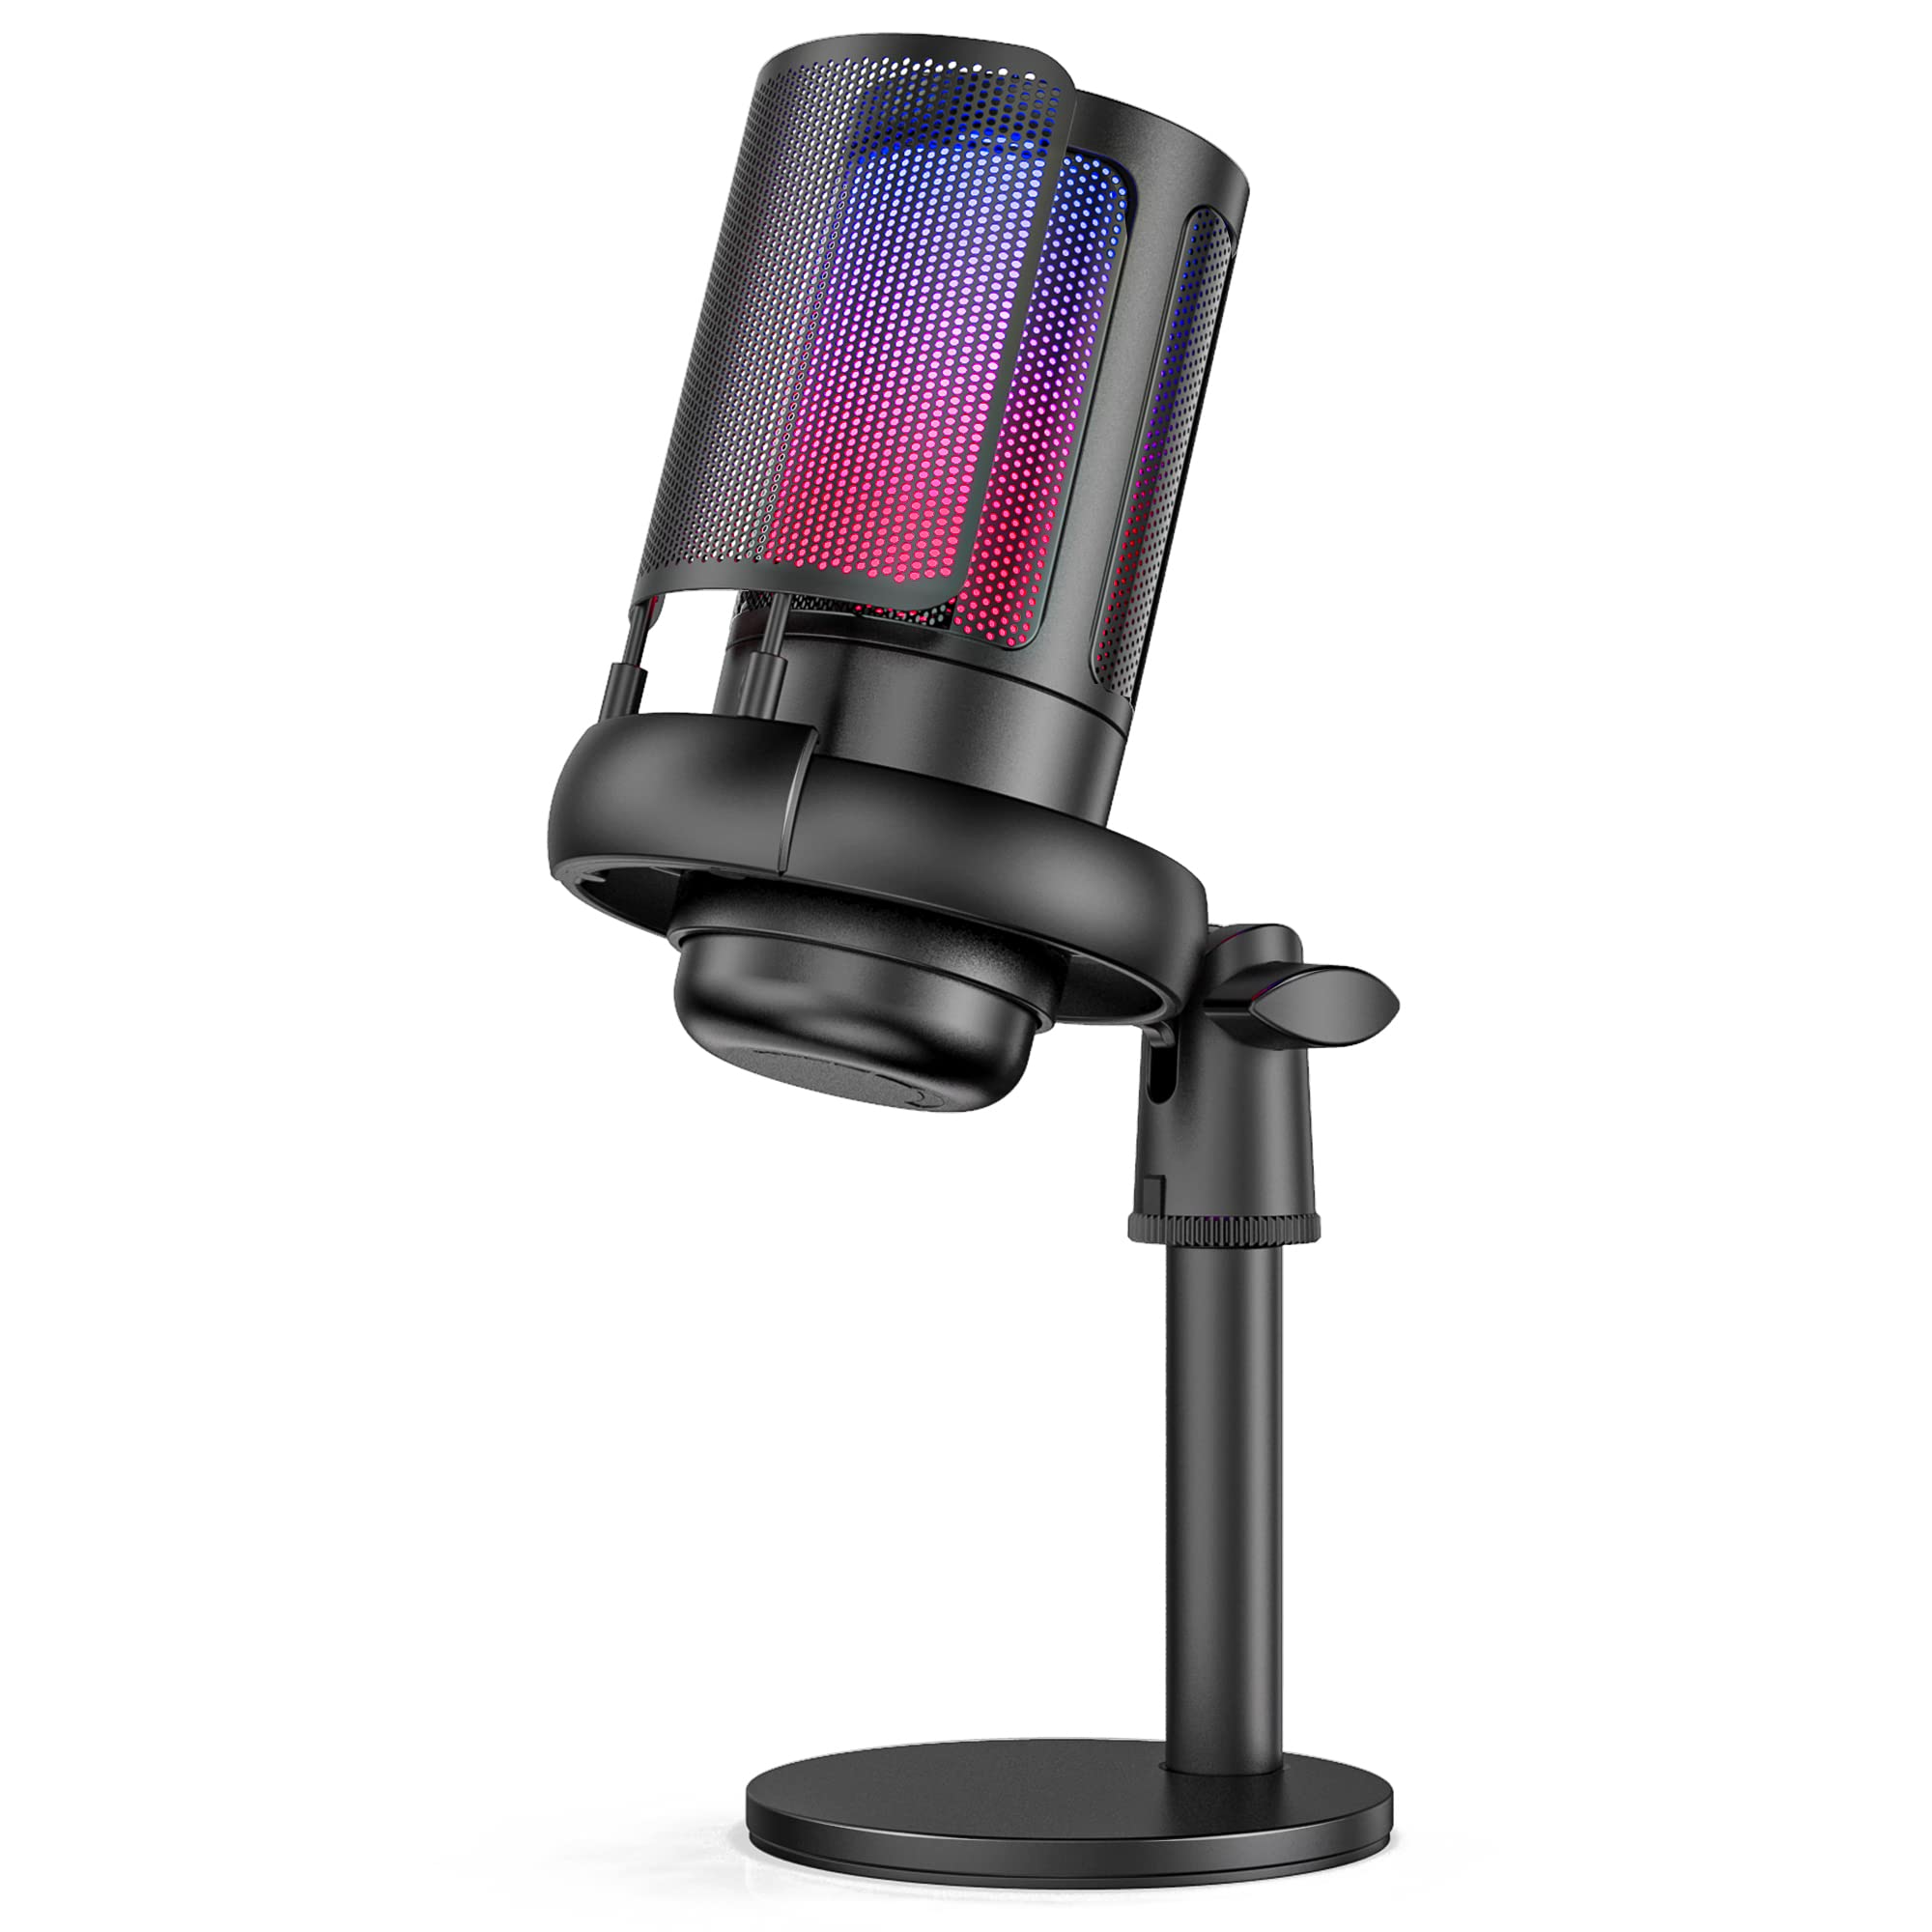 ME6S USB Game Microphone Studio Professional Microphone for PC